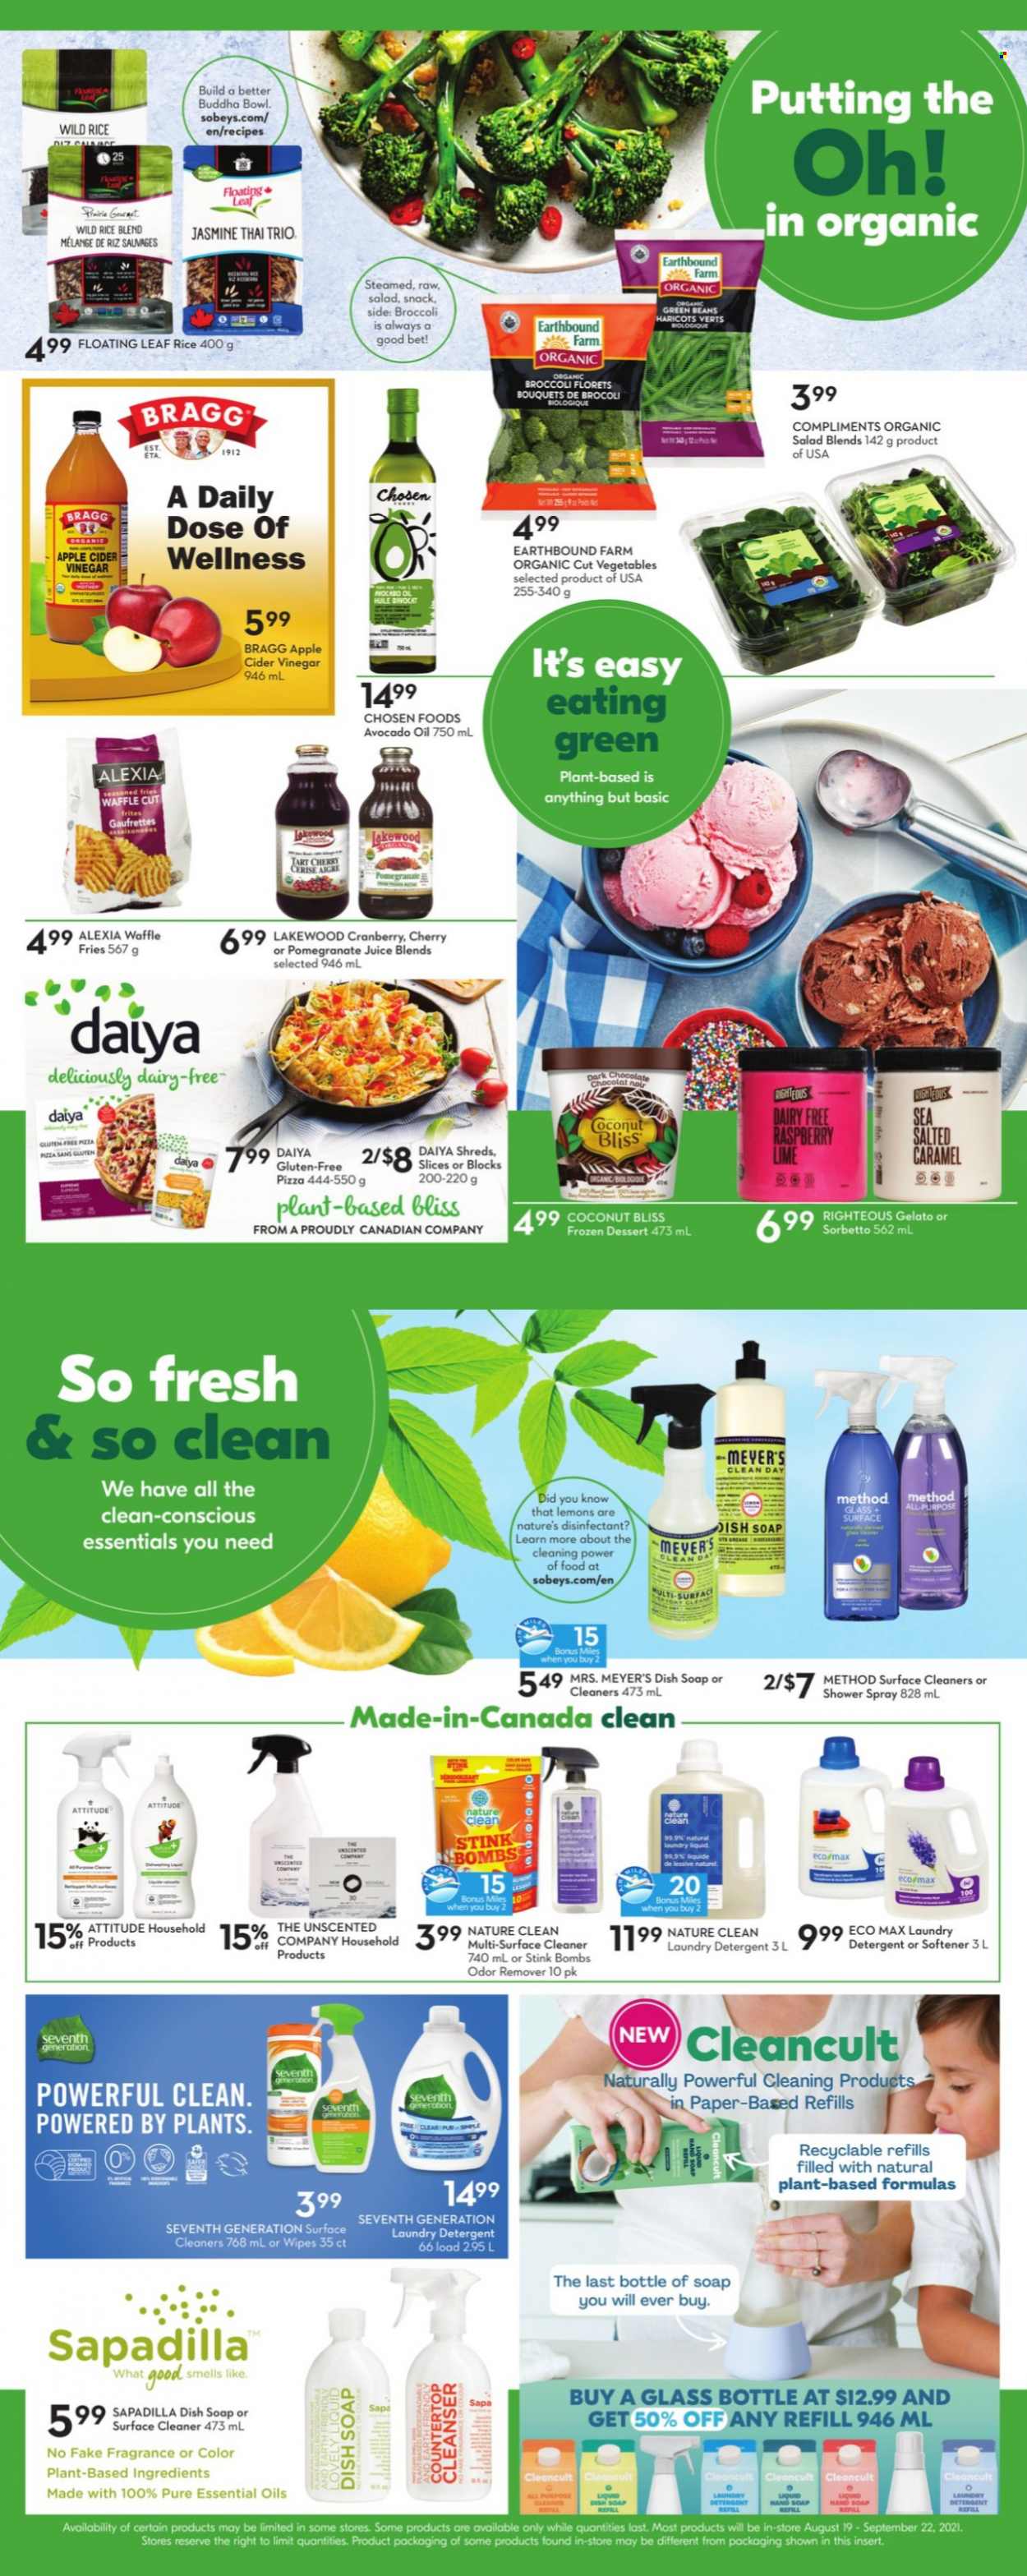 thumbnail - Sobeys Flyer - September 16, 2021 - September 22, 2021 - Sales products - green beans, lemons, pizza, gelato, potato fries, chocolate, snack, rice, apple cider vinegar, avocado oil, vinegar, oil, juice, wipes, surface cleaner, cleaner, all purpose cleaner, fabric softener, laundry detergent, hand soap, soap, cleanser, fragrance, bowl, detergent, desinfection. Page 16.